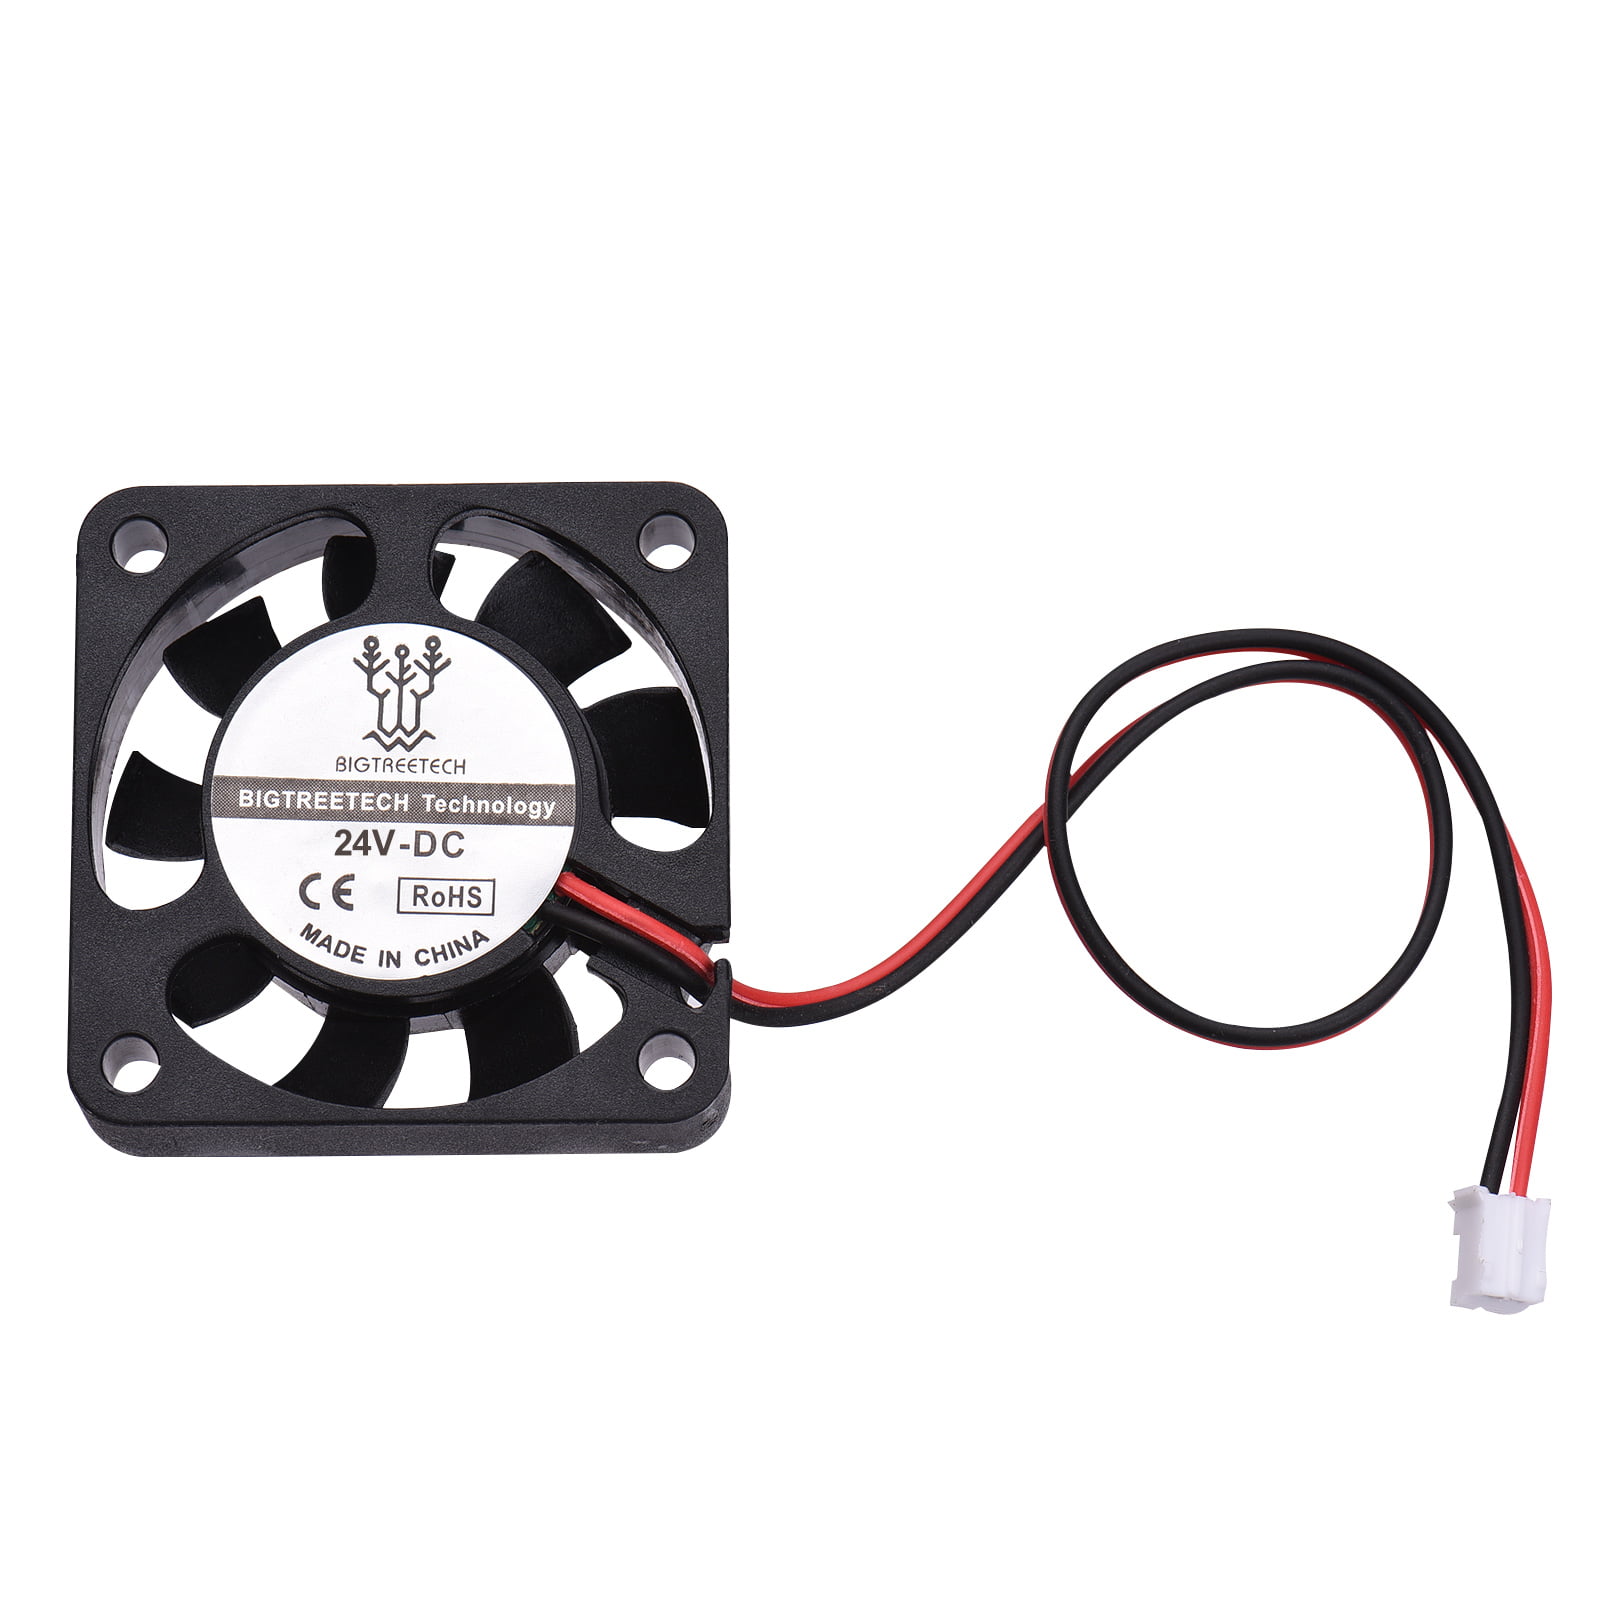 US Brushless DC Cooling Fan 40x40x20mm 4020 5 blades 24V 0.08A 2 pin Connector 